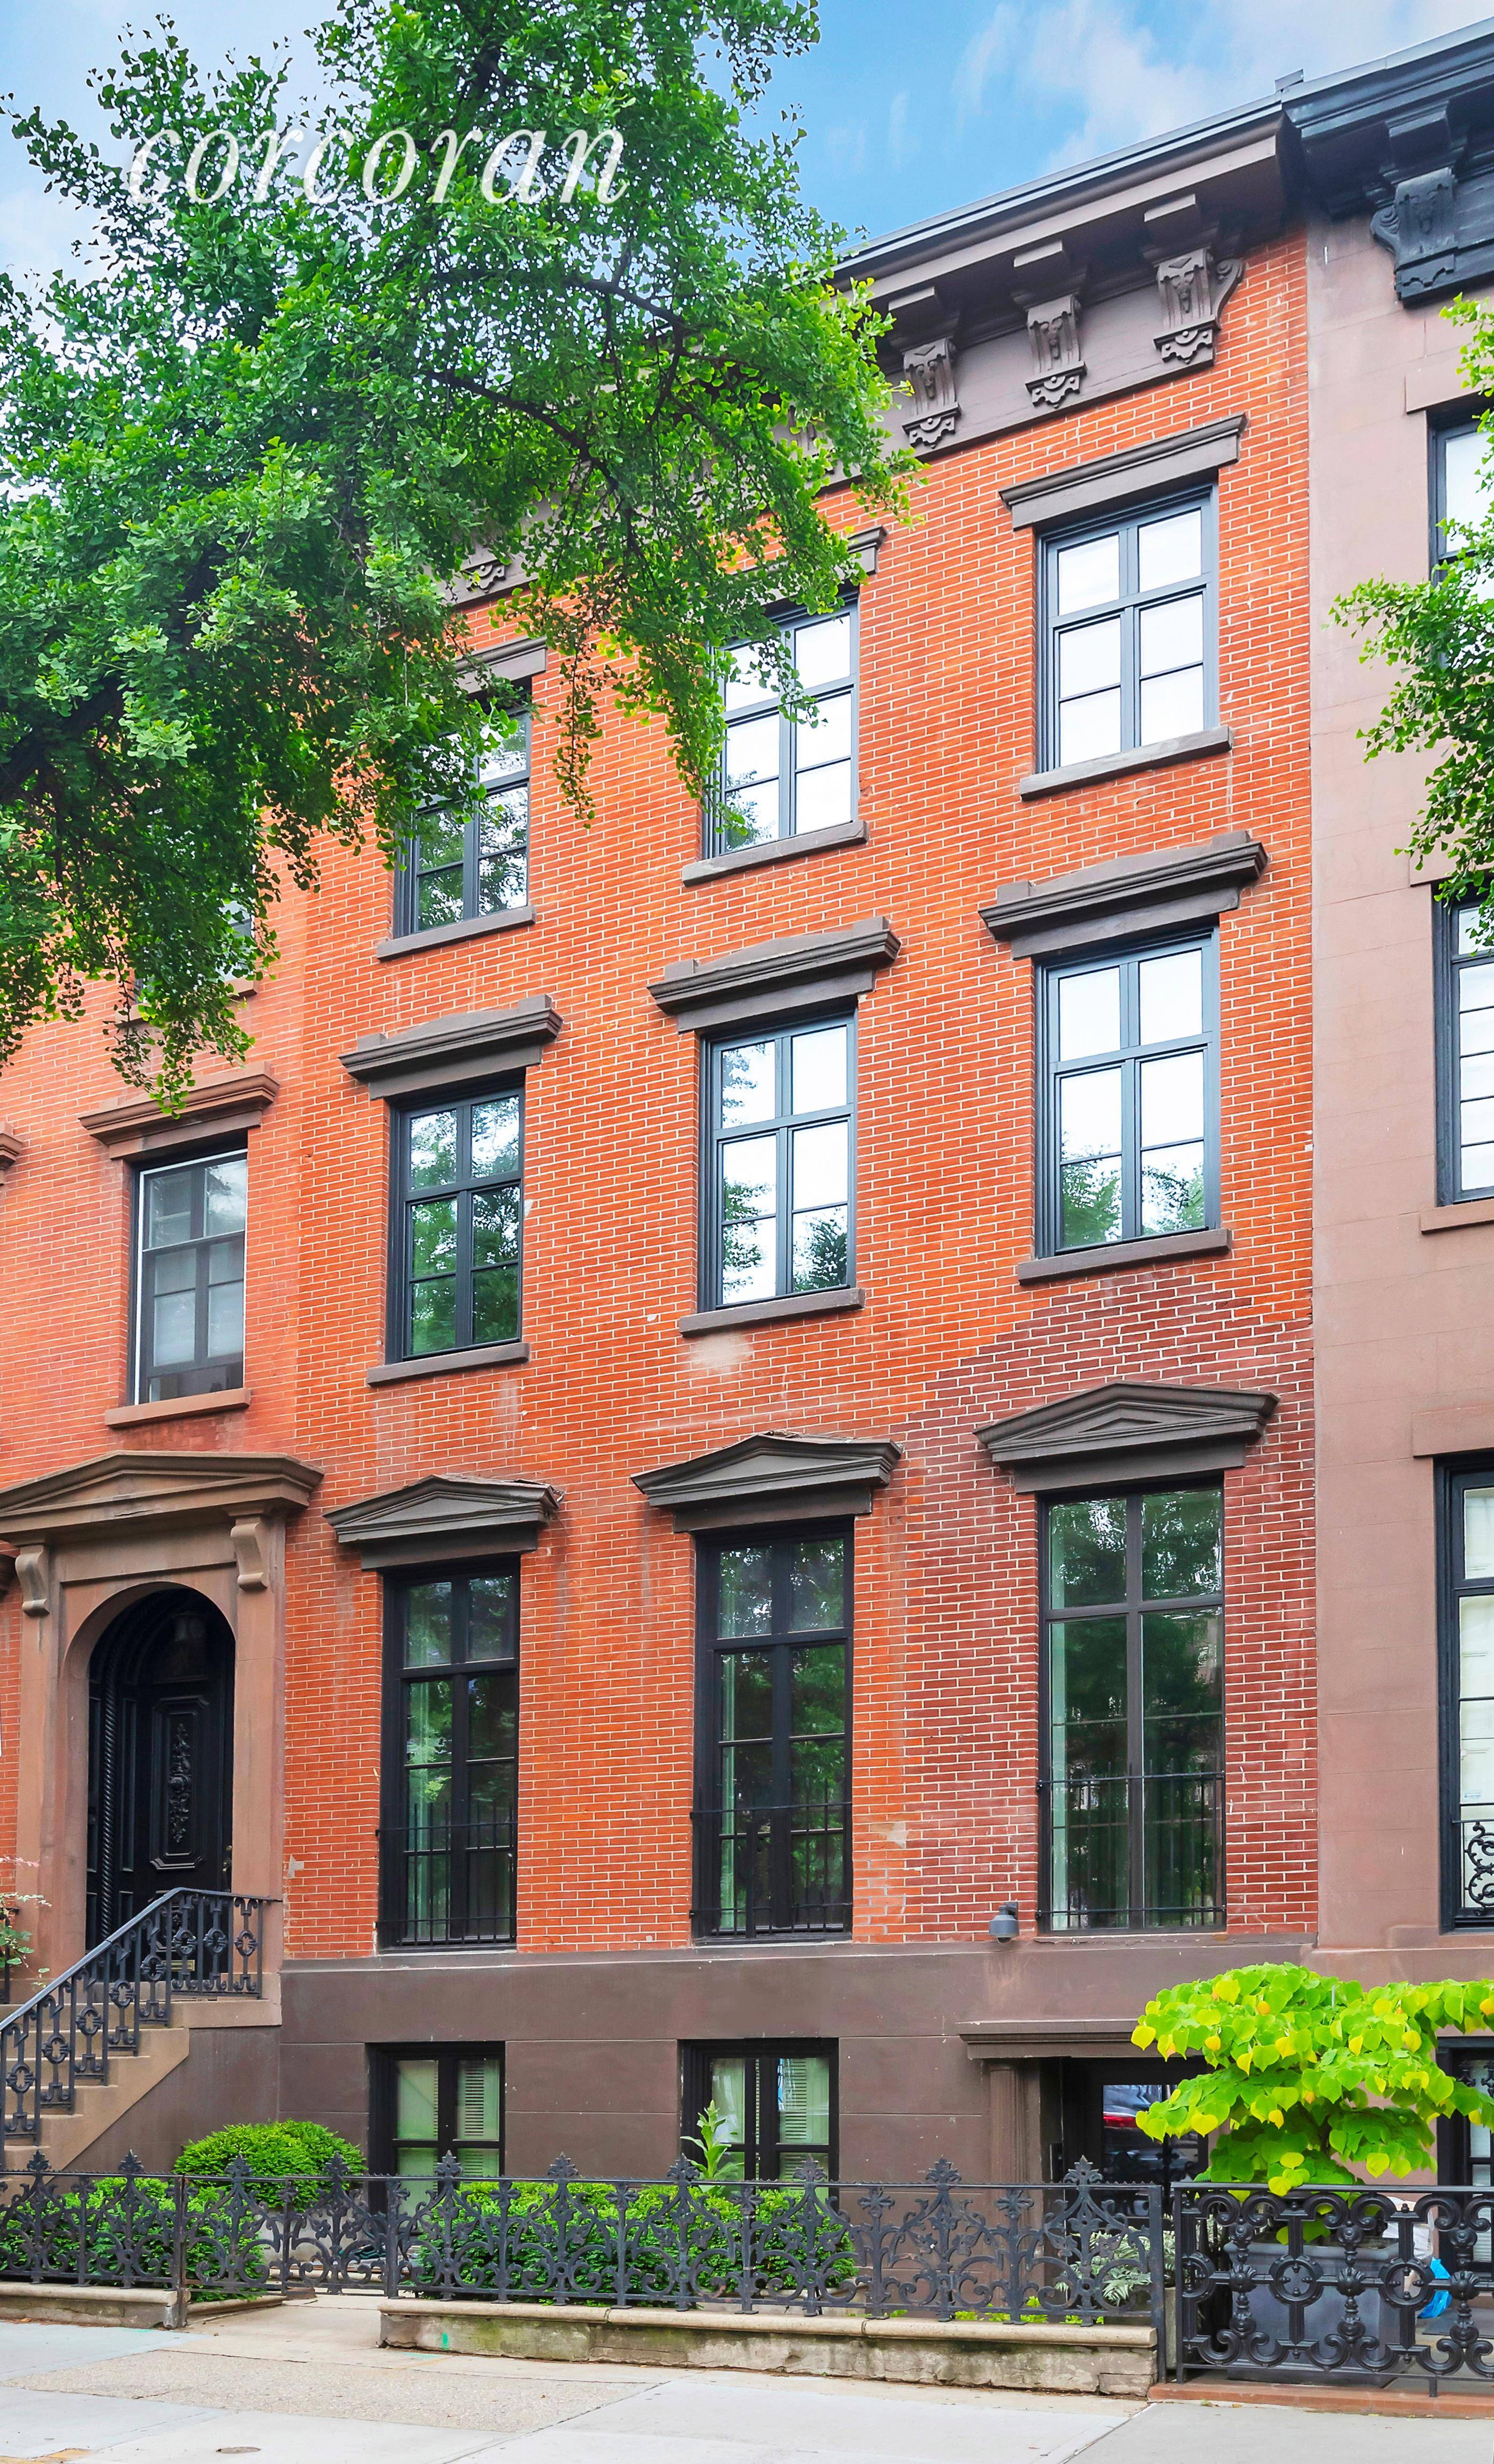 OWNER MUST SELL ! 14 St. LukeA s Place, Greenwich Village, New York City.